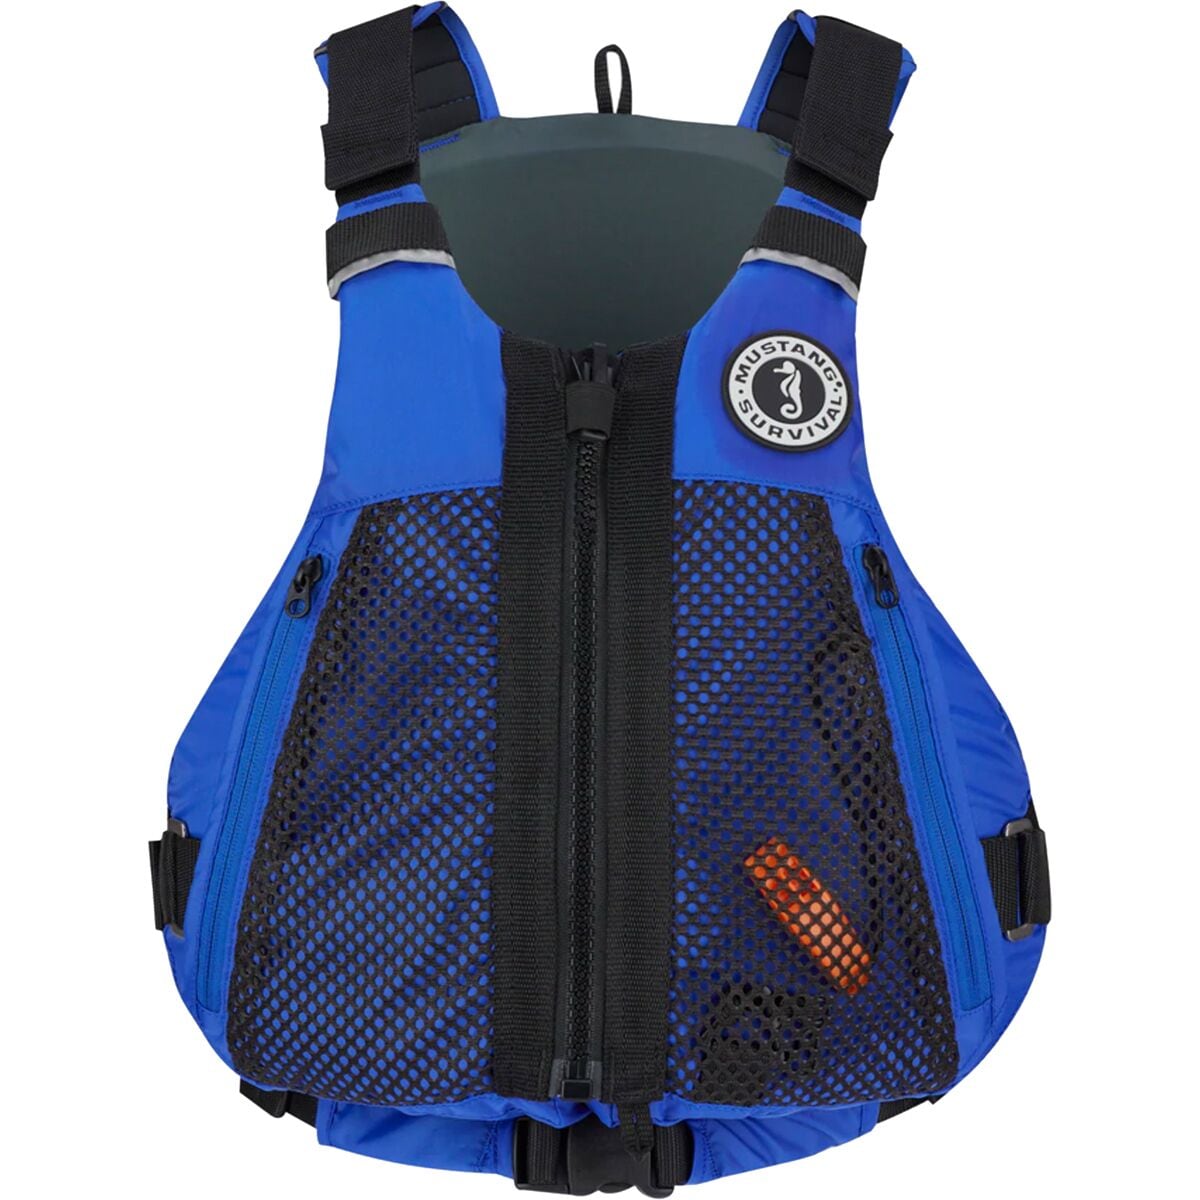 Mustang Survival Trident Personal Flotation Device